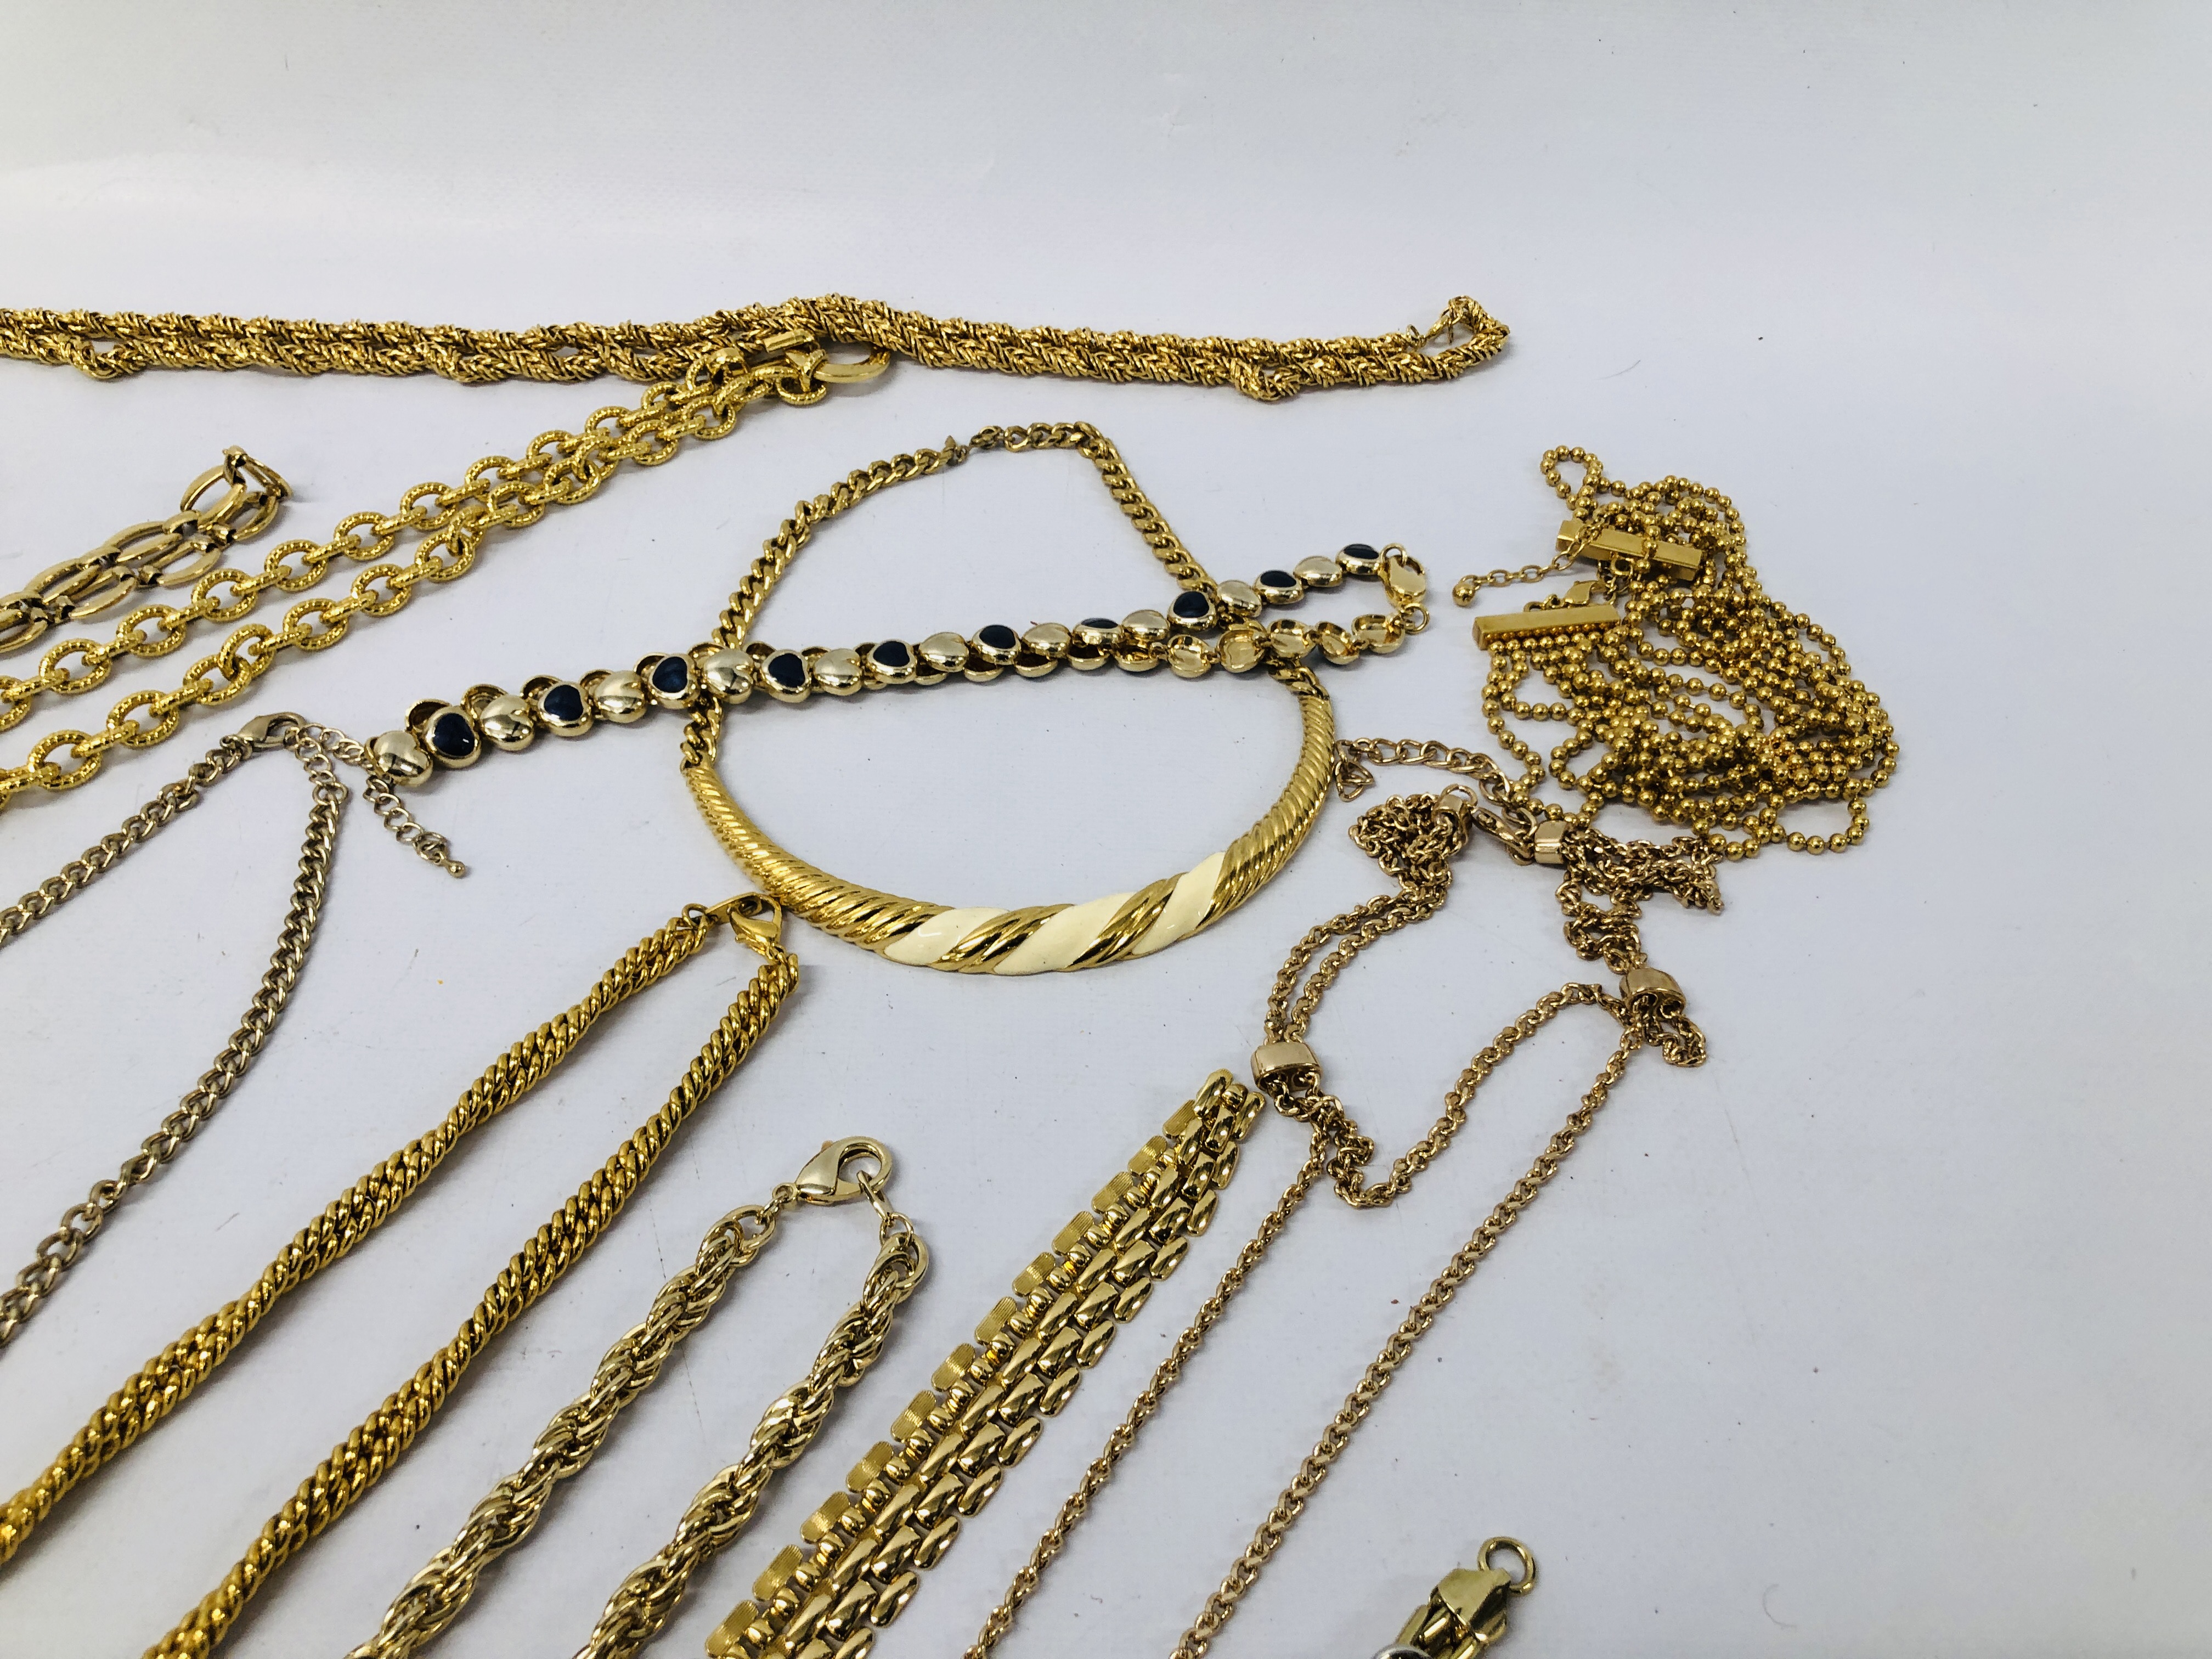 COLLECTION OF DESIGNER COSTUMER JEWELLERY, NECKLACES OF GOLD COLOUR VARIOUS DESIGNS AND LENGTH. - Image 3 of 6